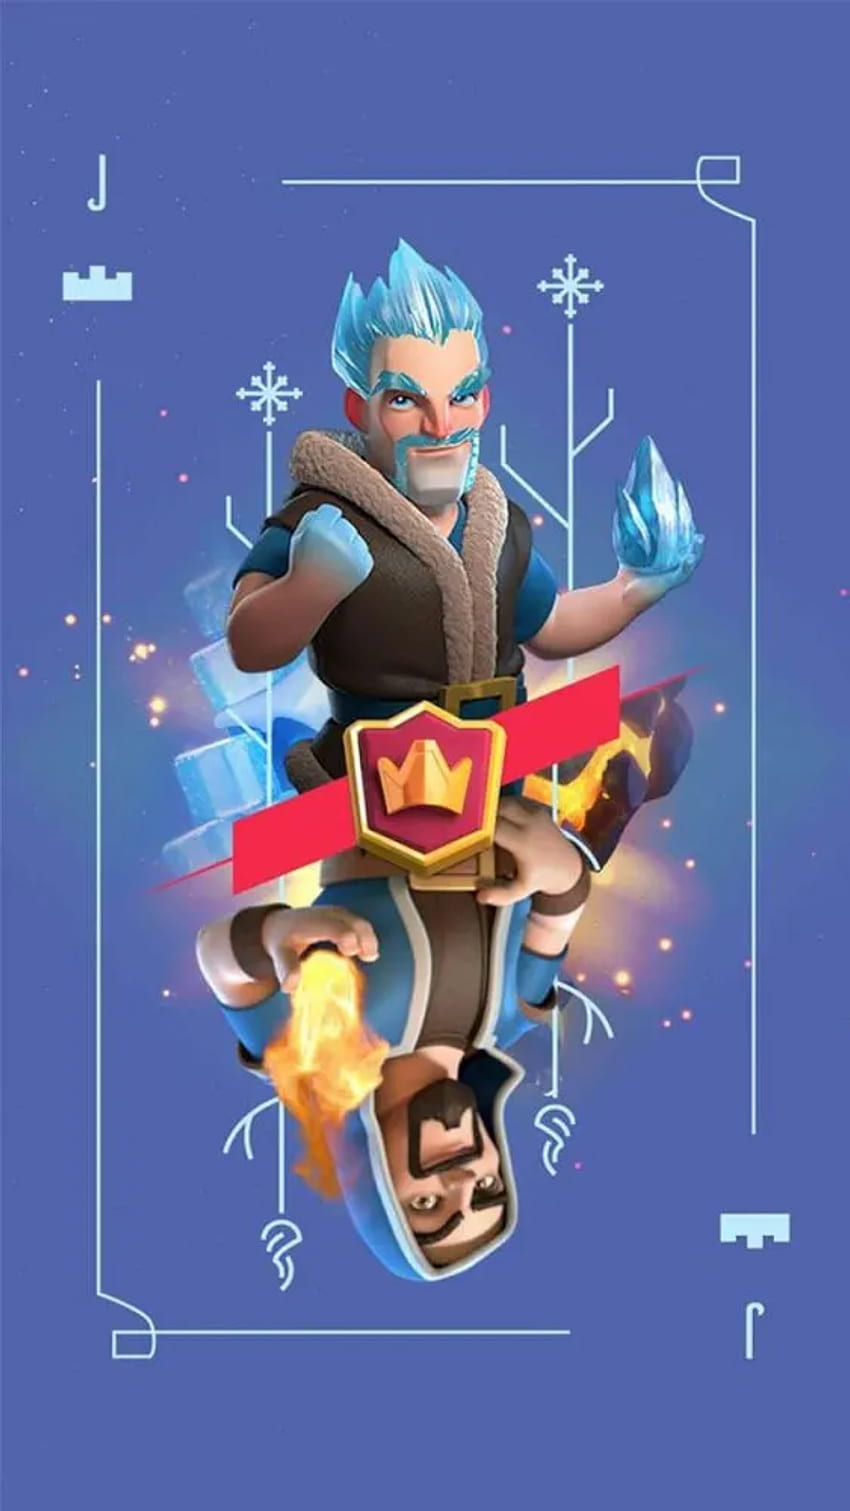 Best for WIZARD and CLASH ROYALE fans. : ClashRoyale, Clash Royale Anime HD  phone wallpaper | Pxfuel